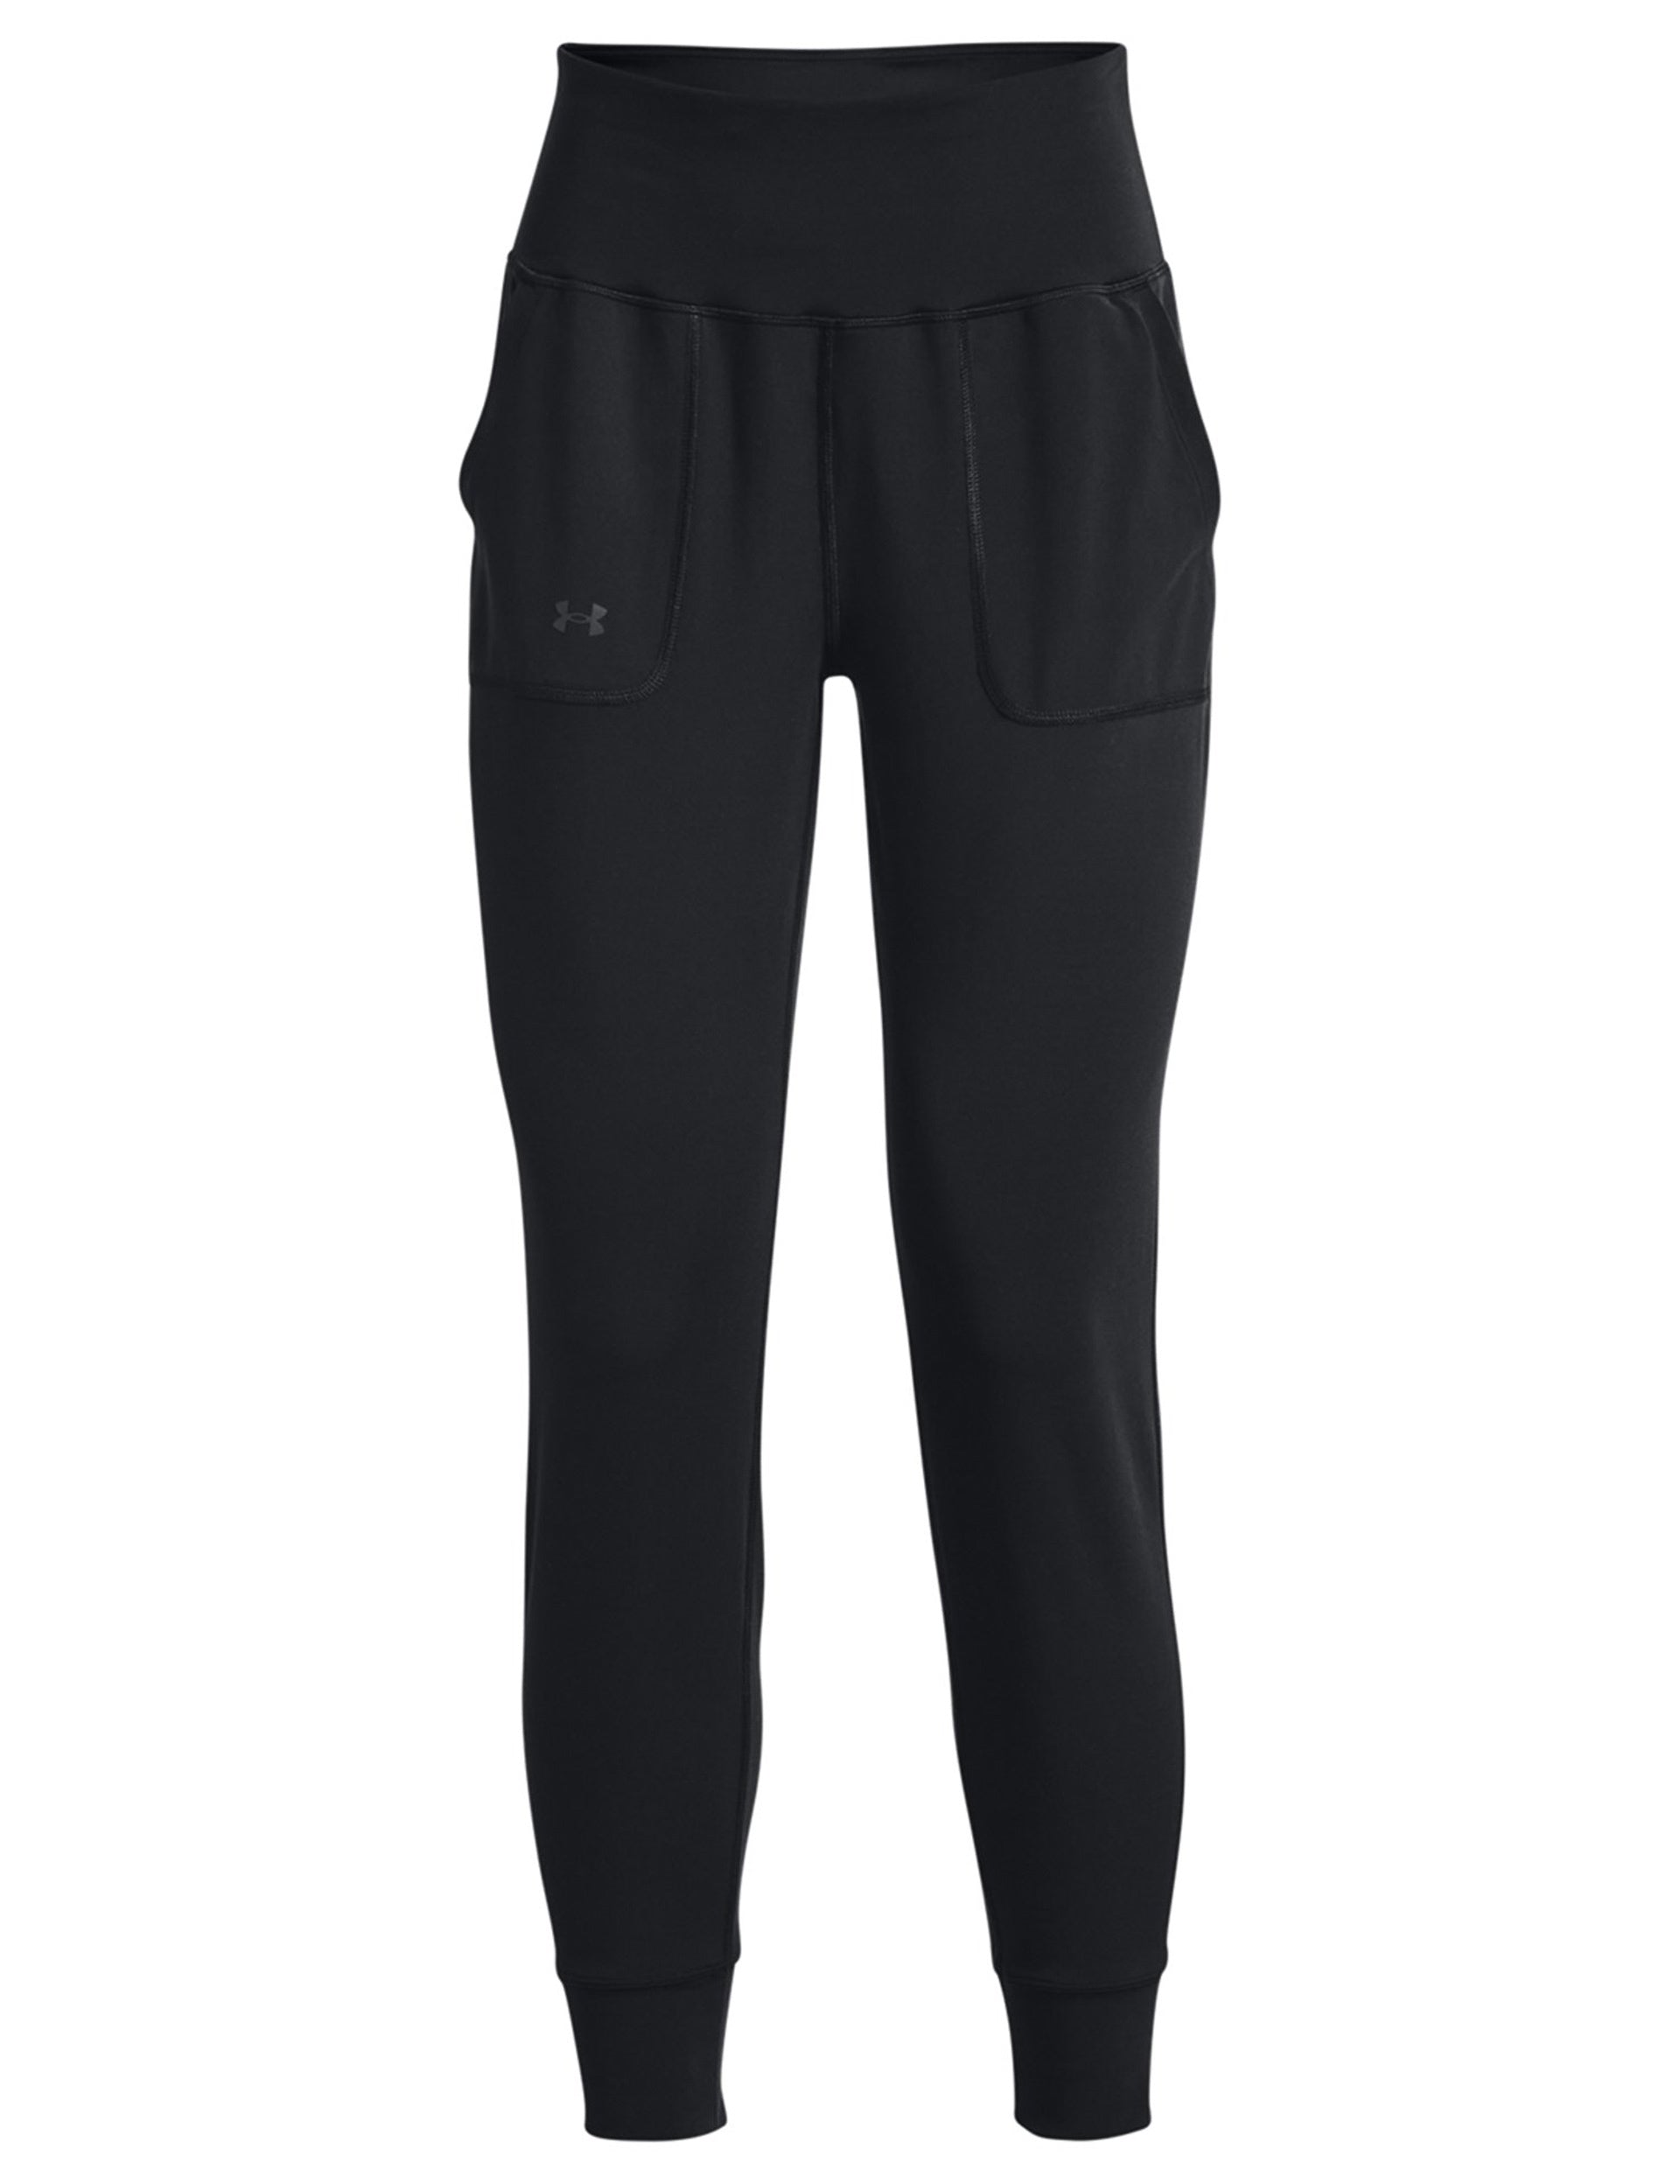 Under Armour, Pants & Jumpsuits, Under Armour Womens Tapered Fleece Pants  Size Small